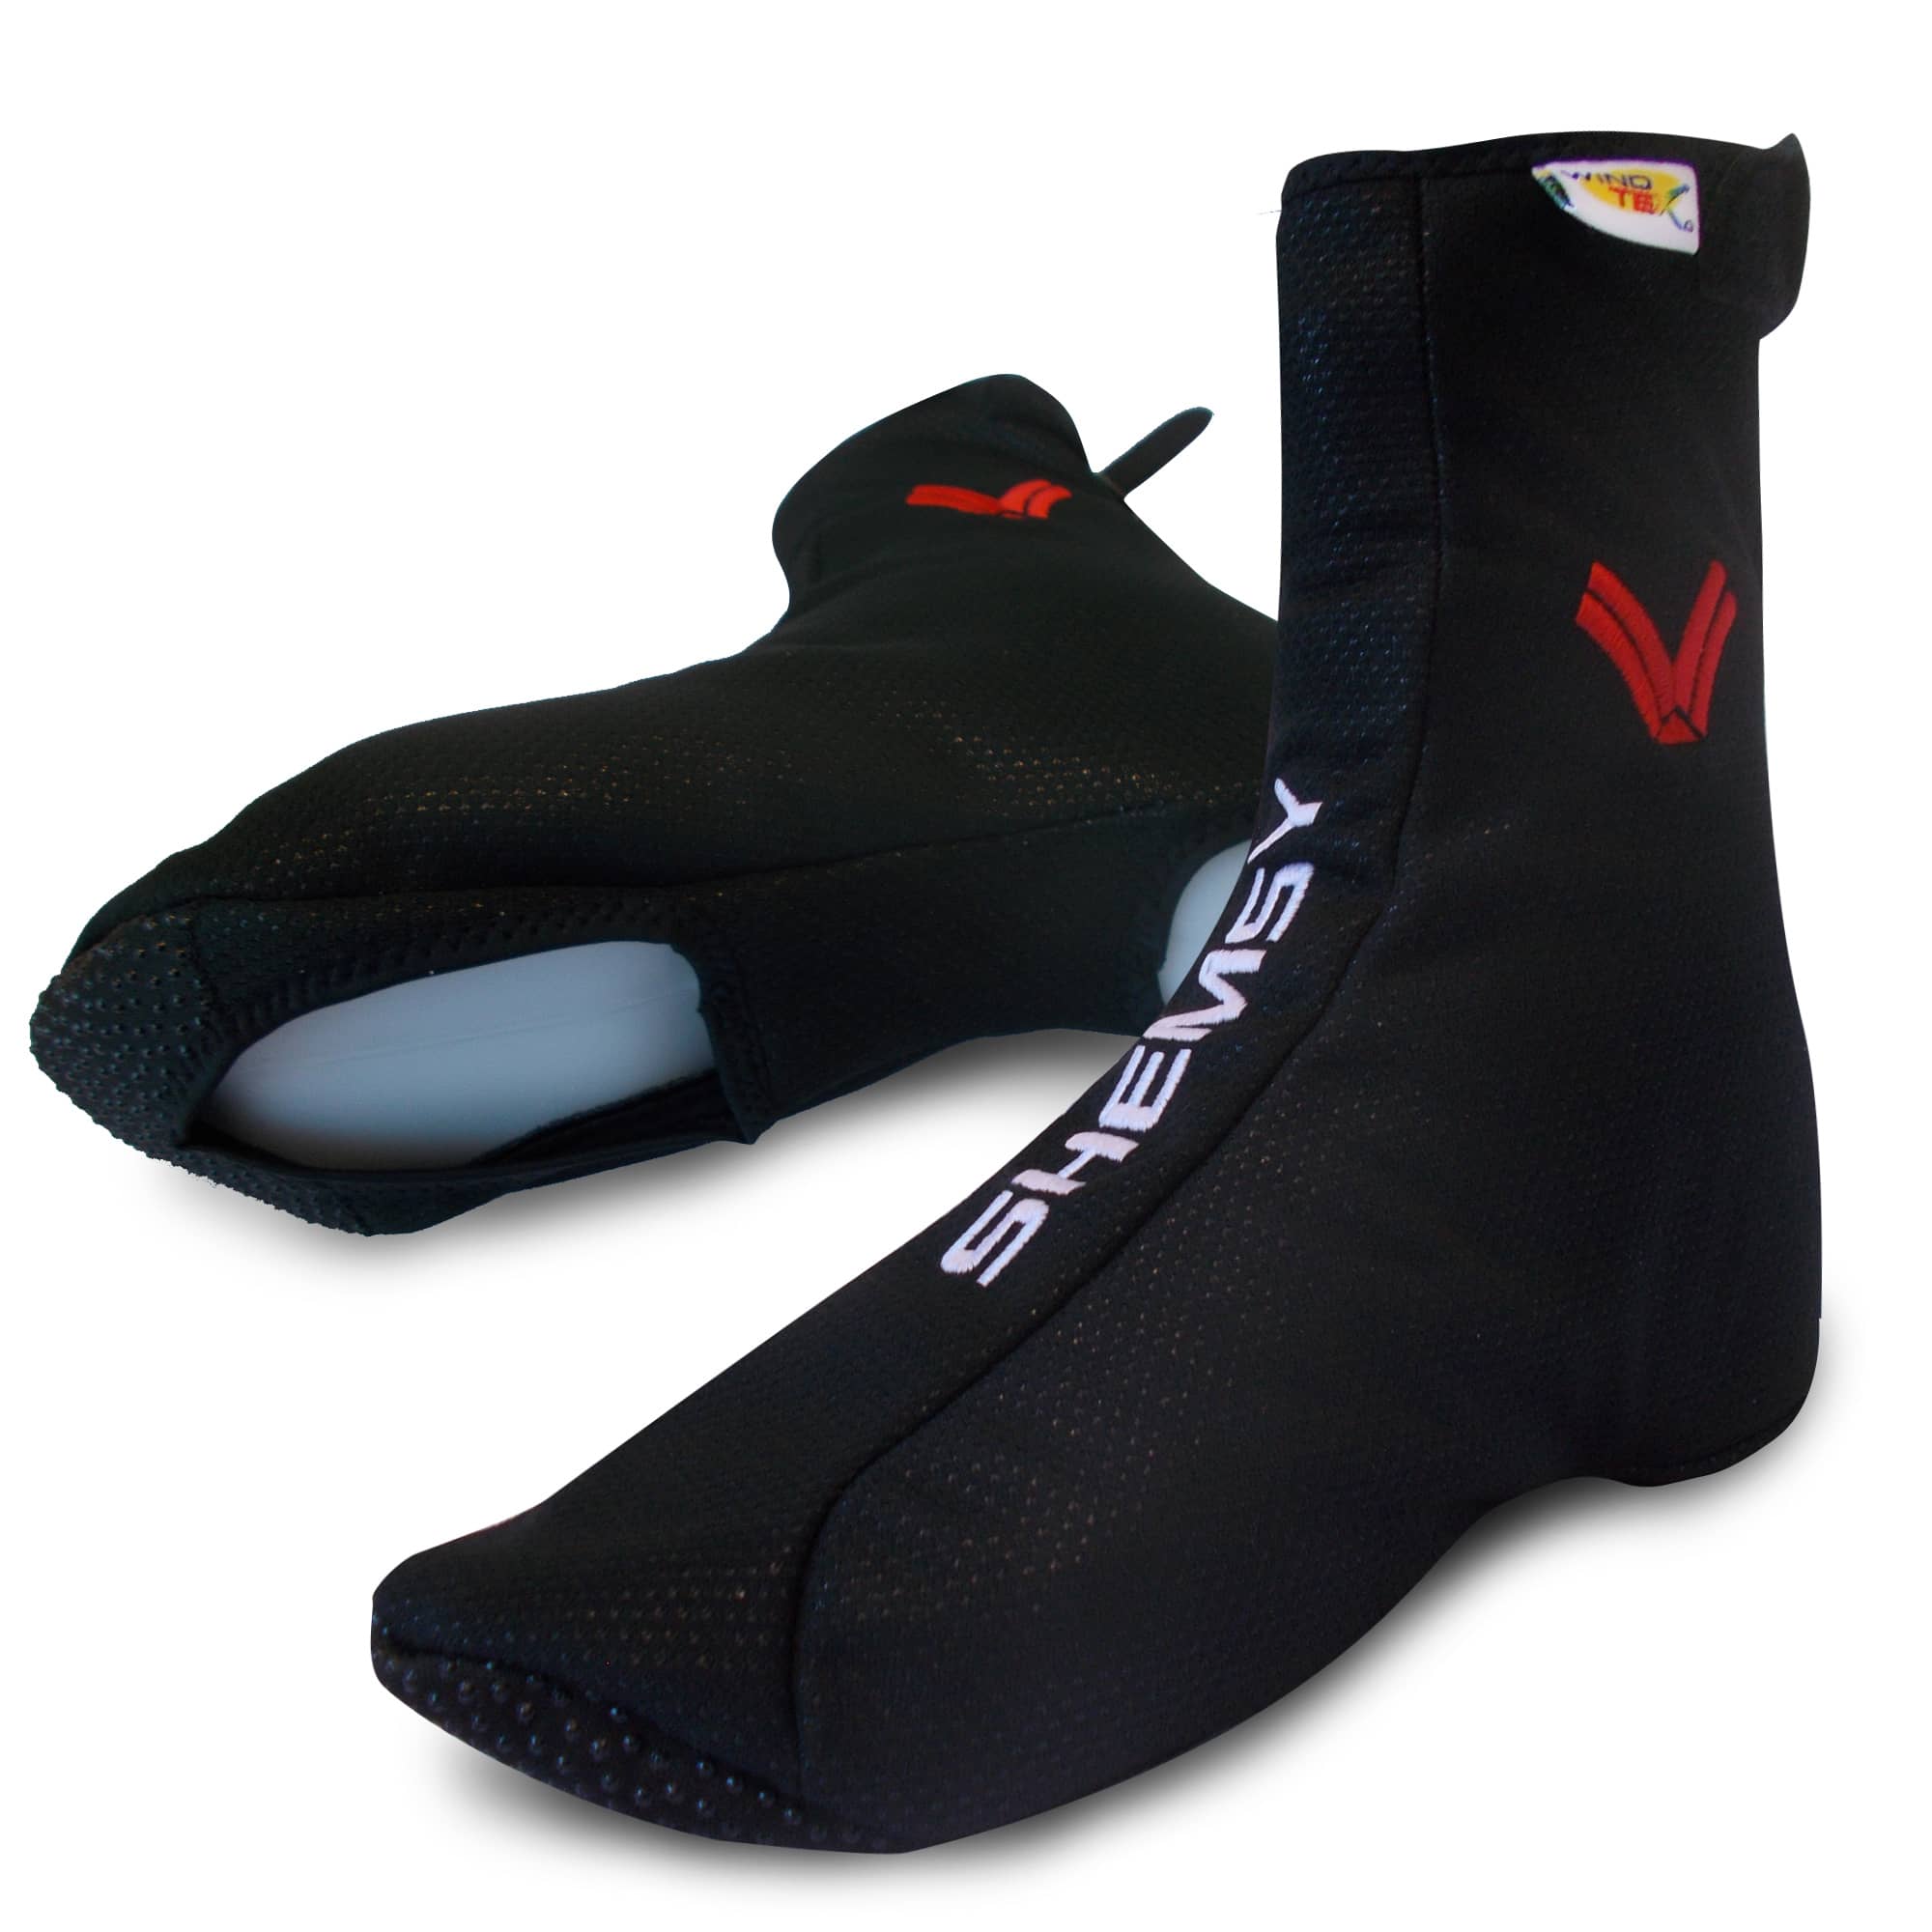 Couvre-chaussures cyclisme coupe-vent hiver - Shemsy Sport